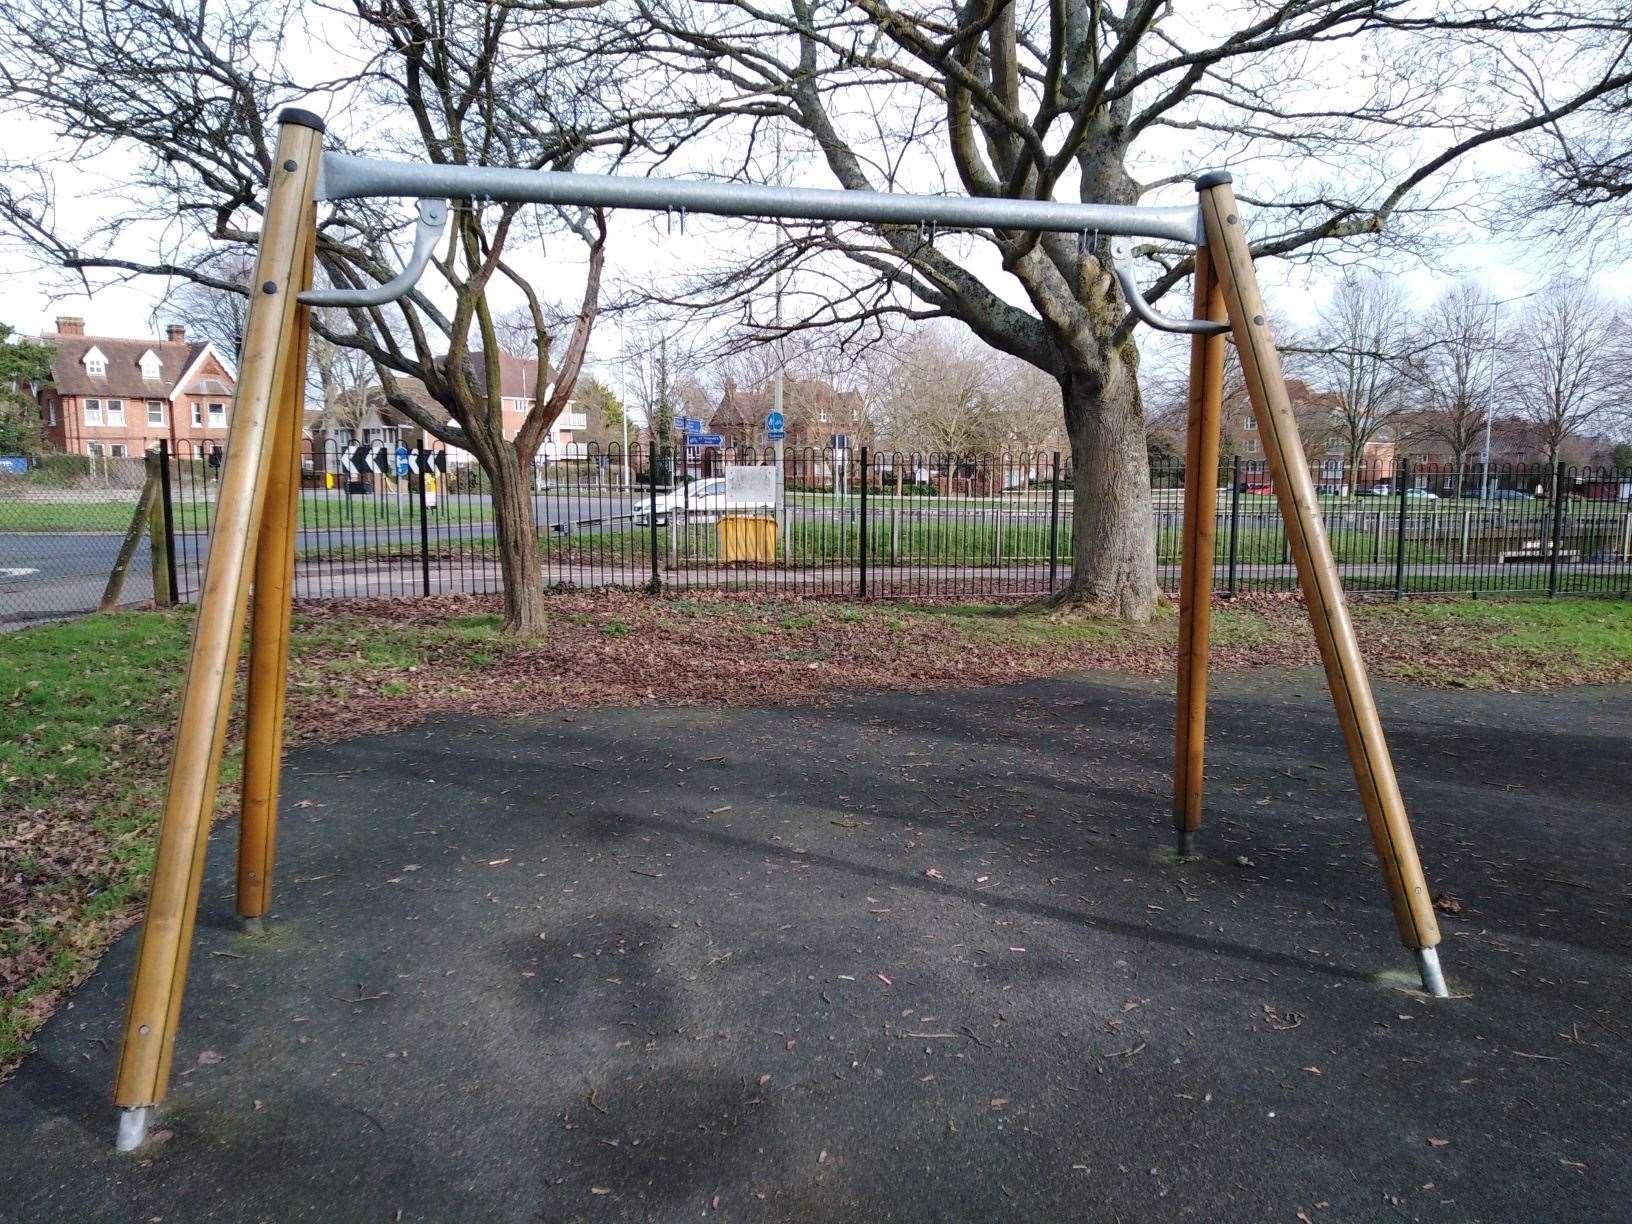 Missing swings in the Victoria recreation ground